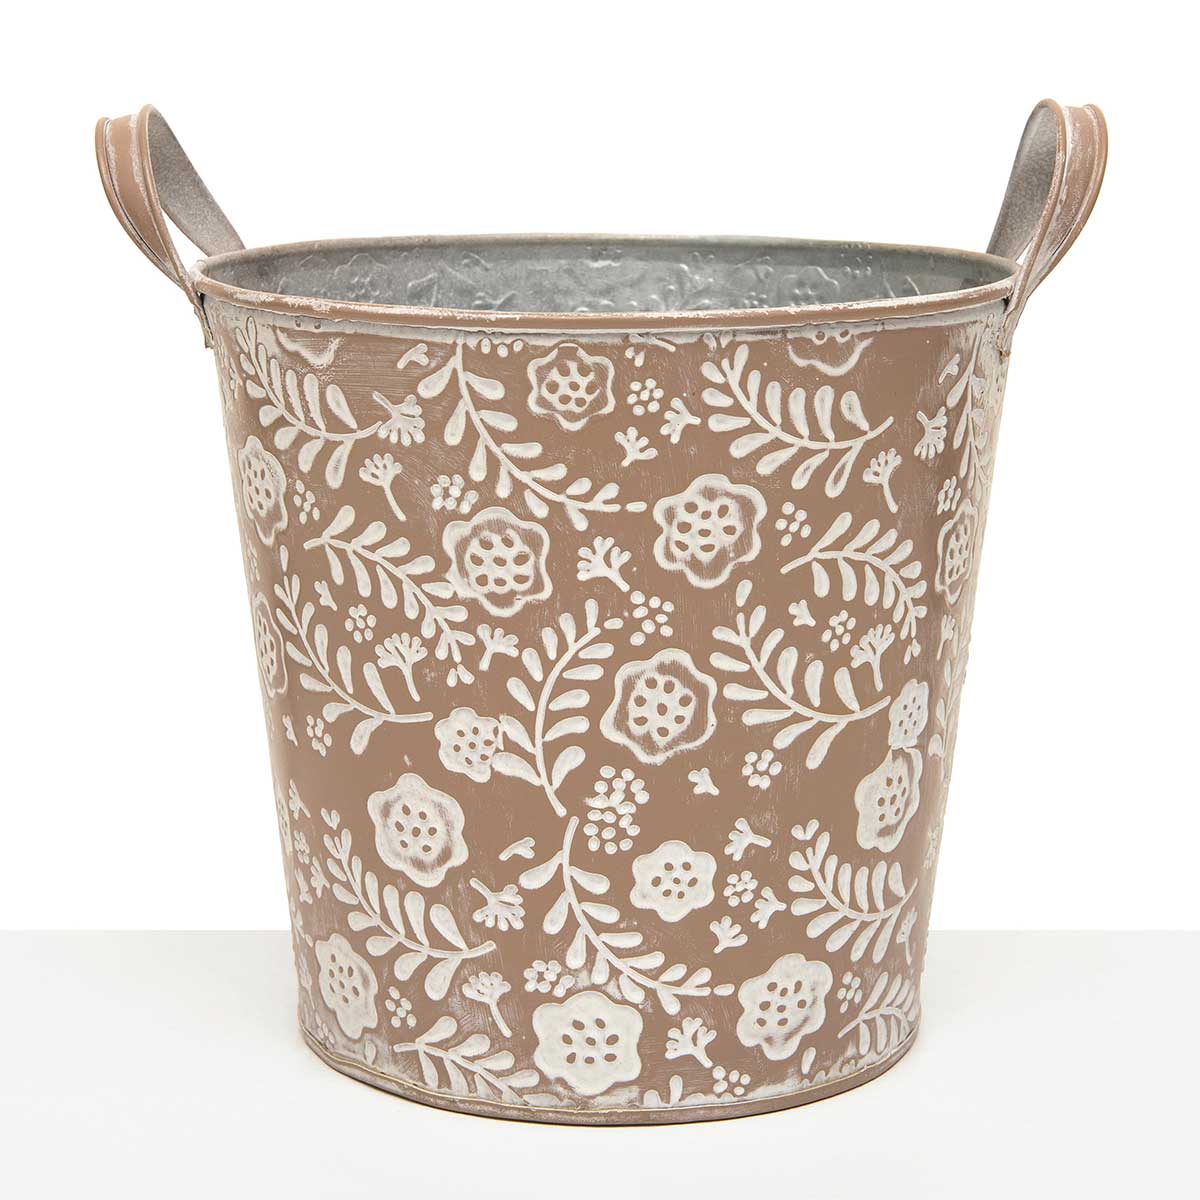 BUCKET FLOWER LARGE 7.5IN X 7IN TAUPE/WHITE METAL WITH HANDLES